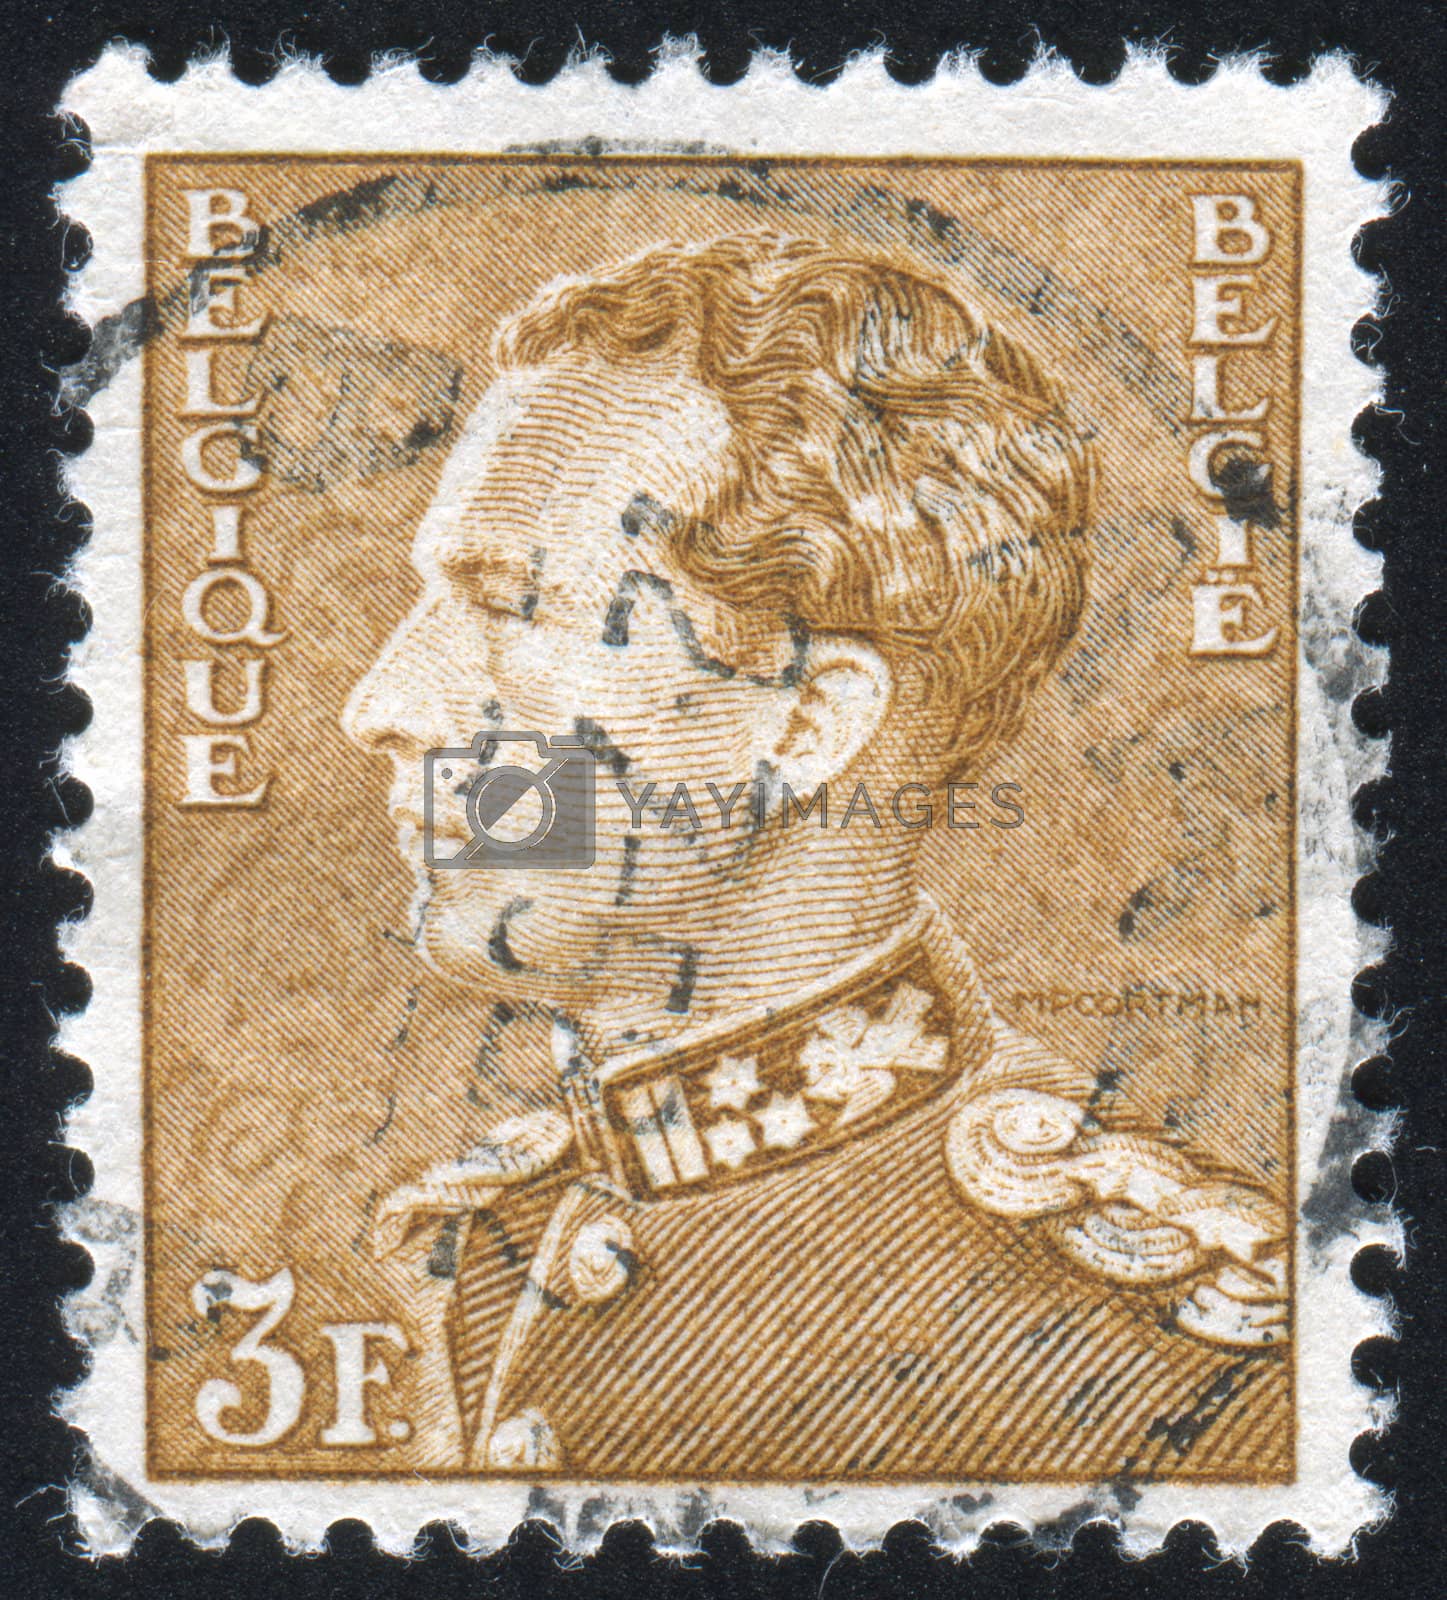 Royalty free image of stamp by rook